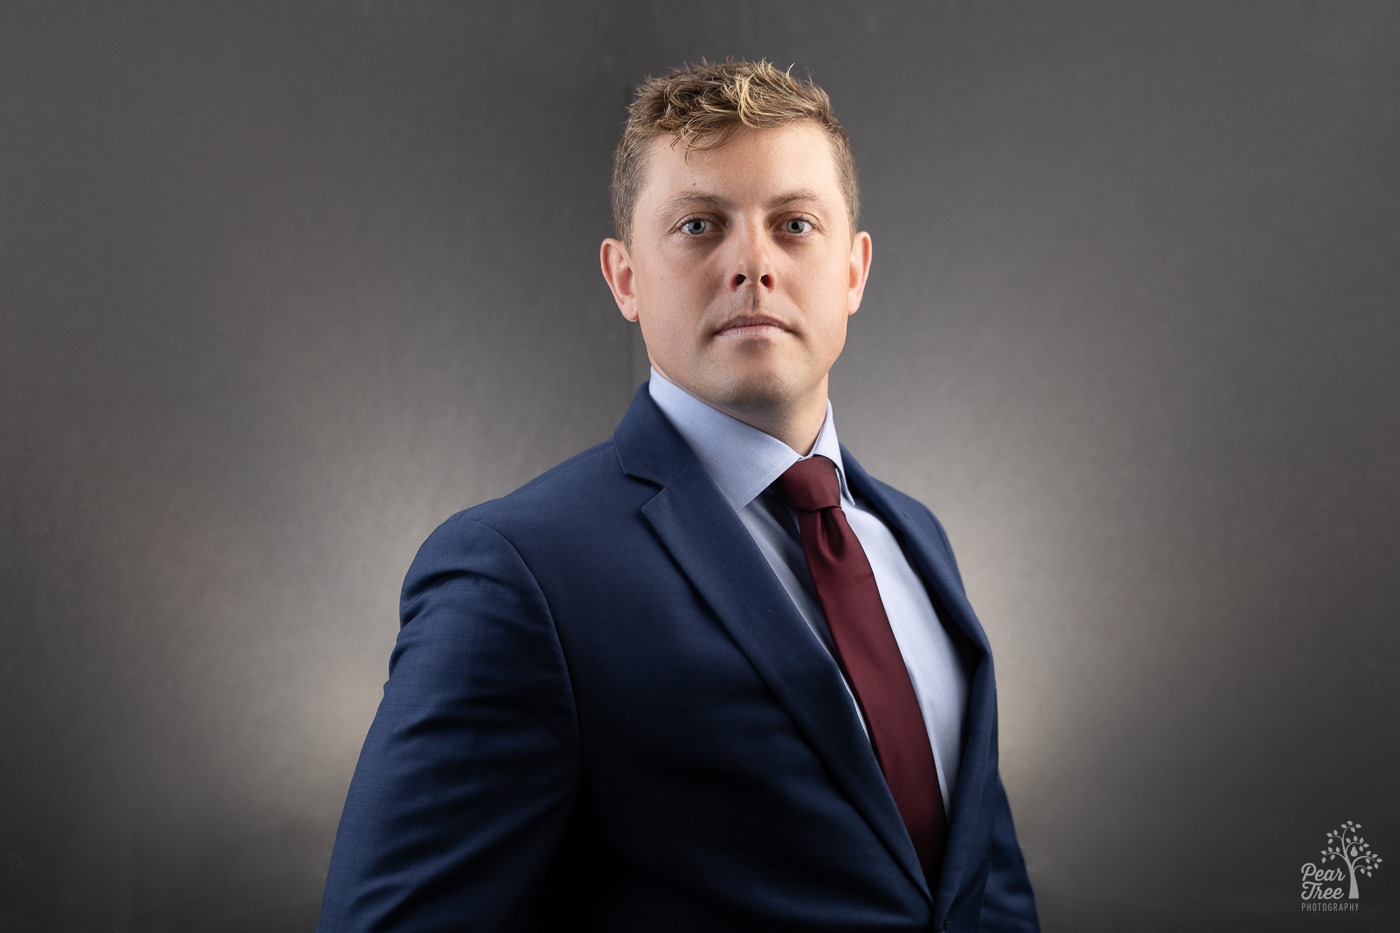 Blond man in blue suit and maroon tie looking very serious for professional headshot photograph in Canton